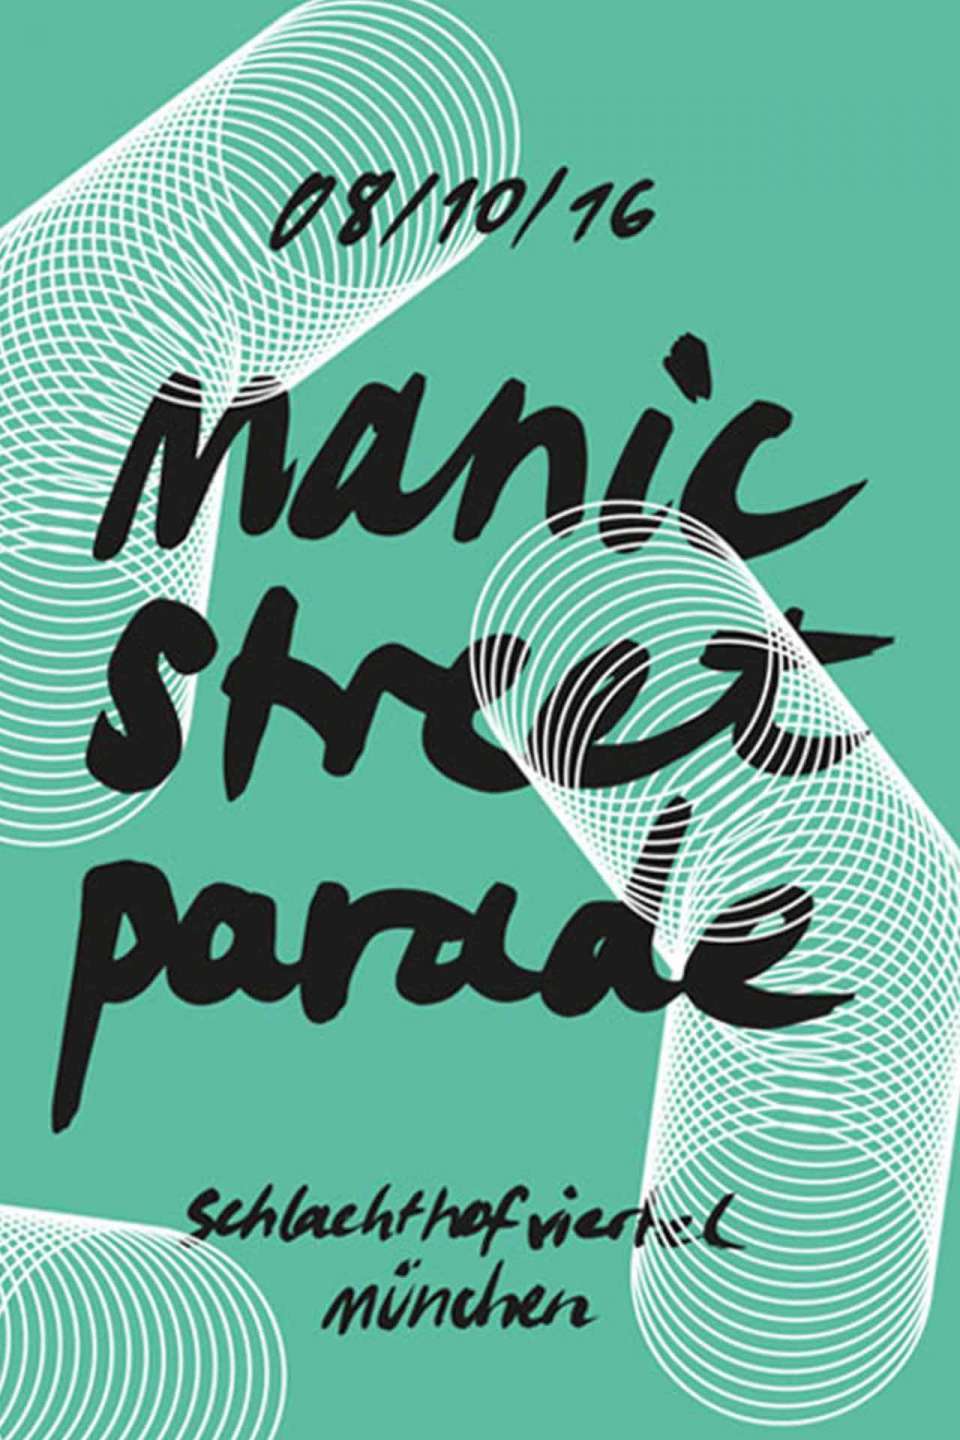 manic street parade – Münchens neues Clubfestival